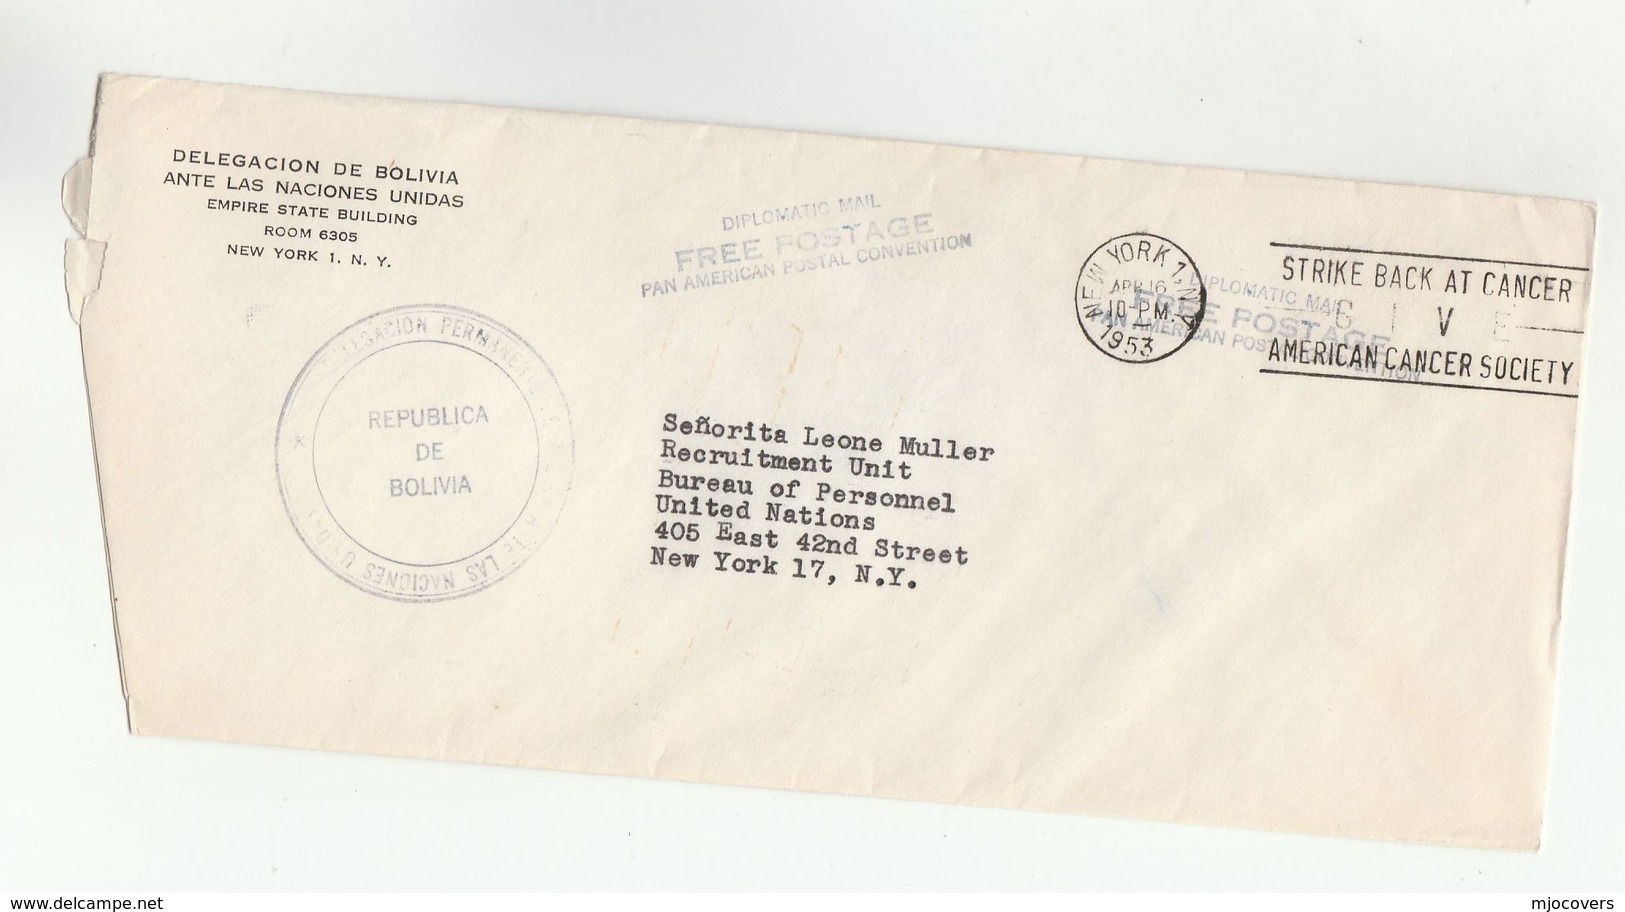 1953 BOLIVIA At UN - DELEGATION OF BOLIVIA TO UNITED NATIONS COVER Usa DIPLOMATIC POST FREE PANAMERICAN POST CONVENTION - Bolivia